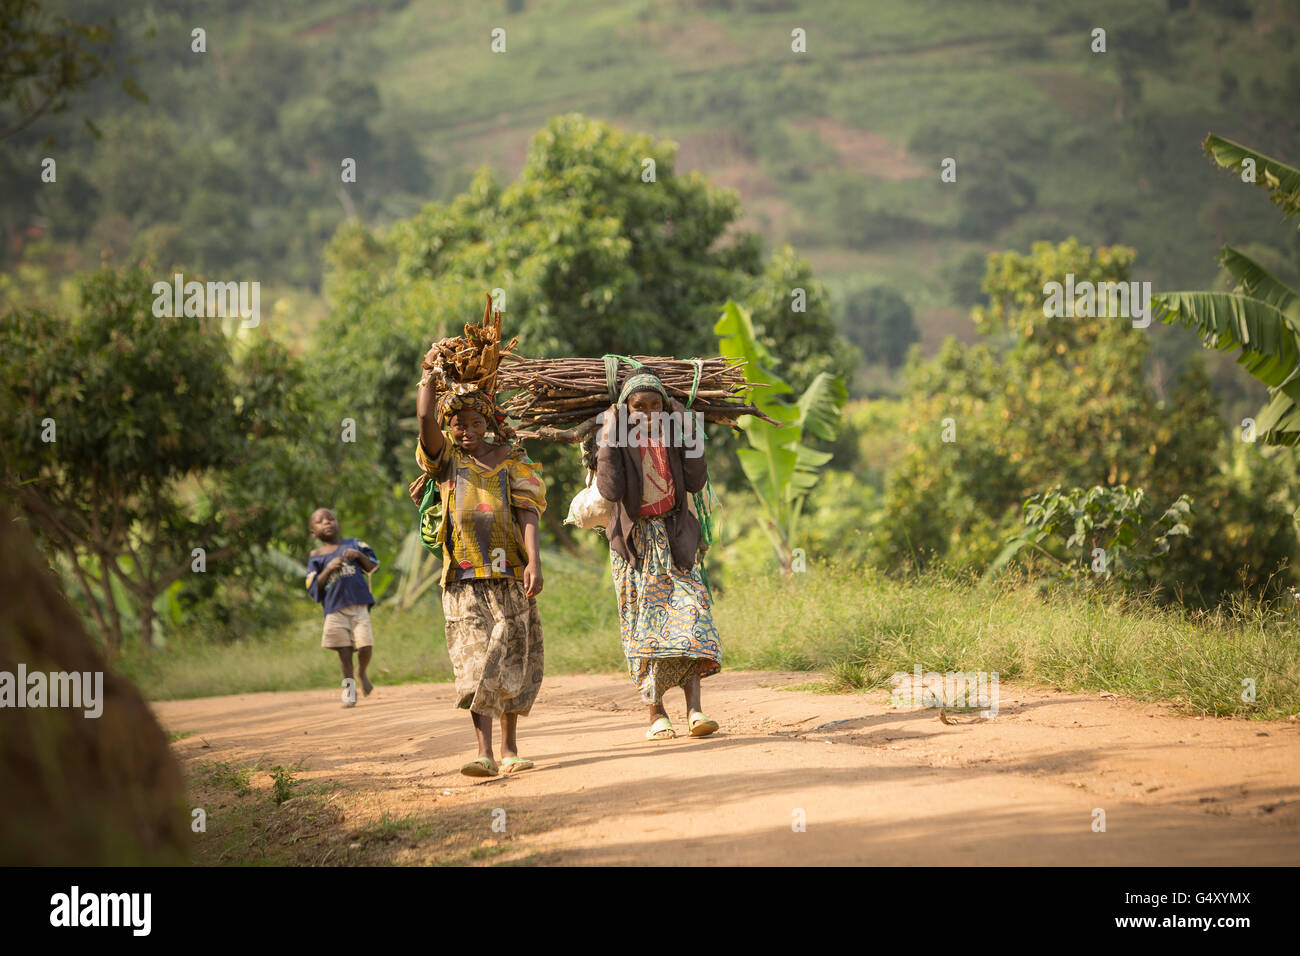 Women carry firewood down a rural village lane in the foothills of the Rwenzori Mountains on the DRC / Uganda border. Stock Photo